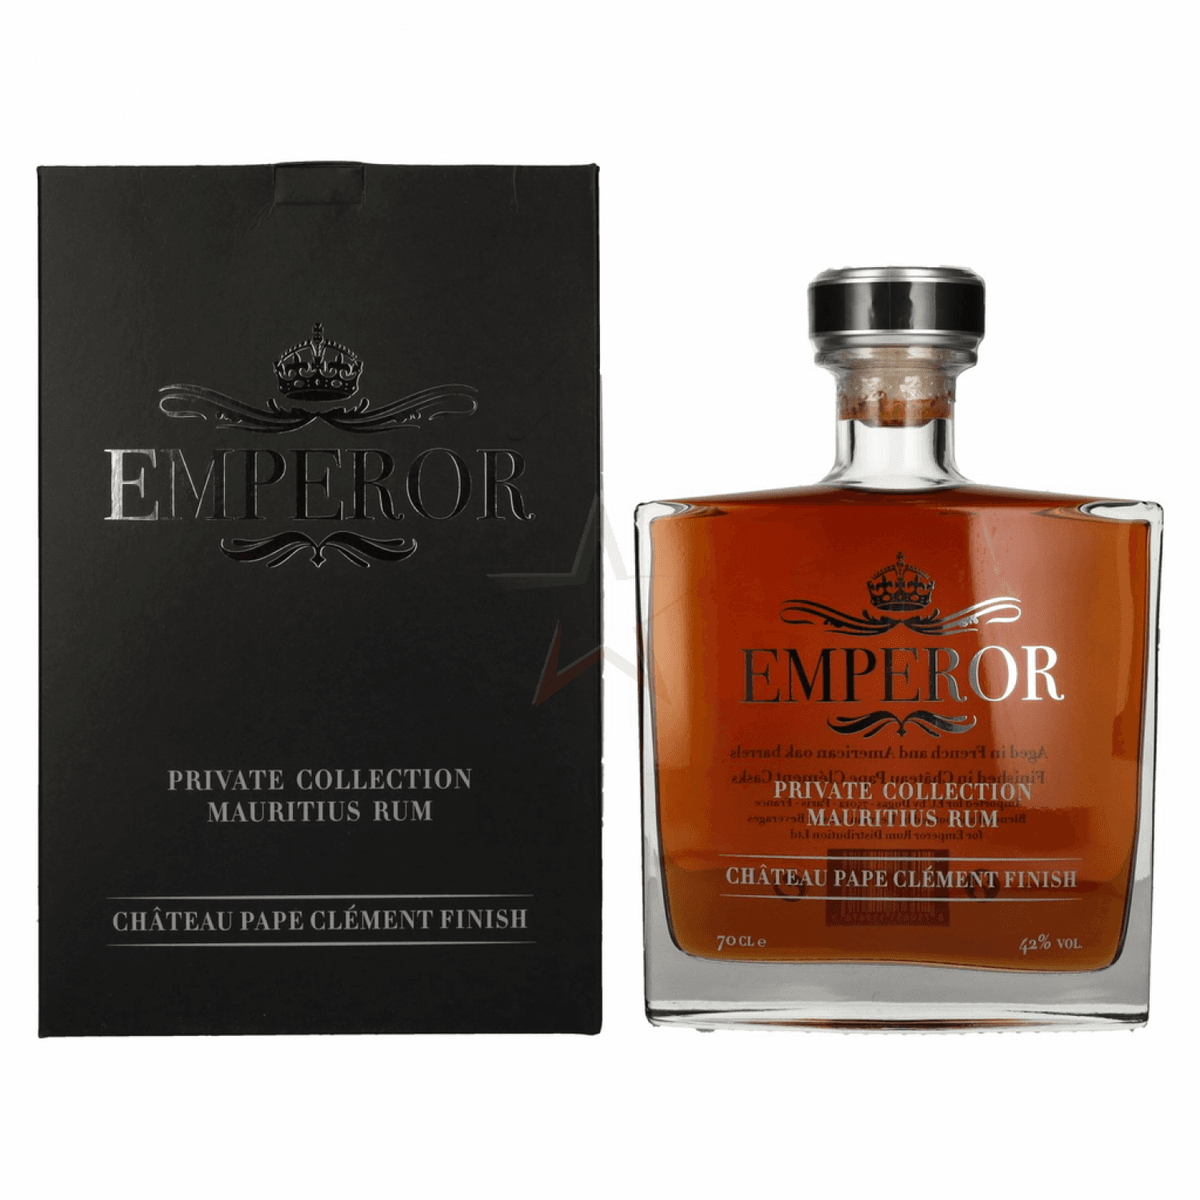 Emperor Private Collection Limited Edition Mauritius Rum 700ml